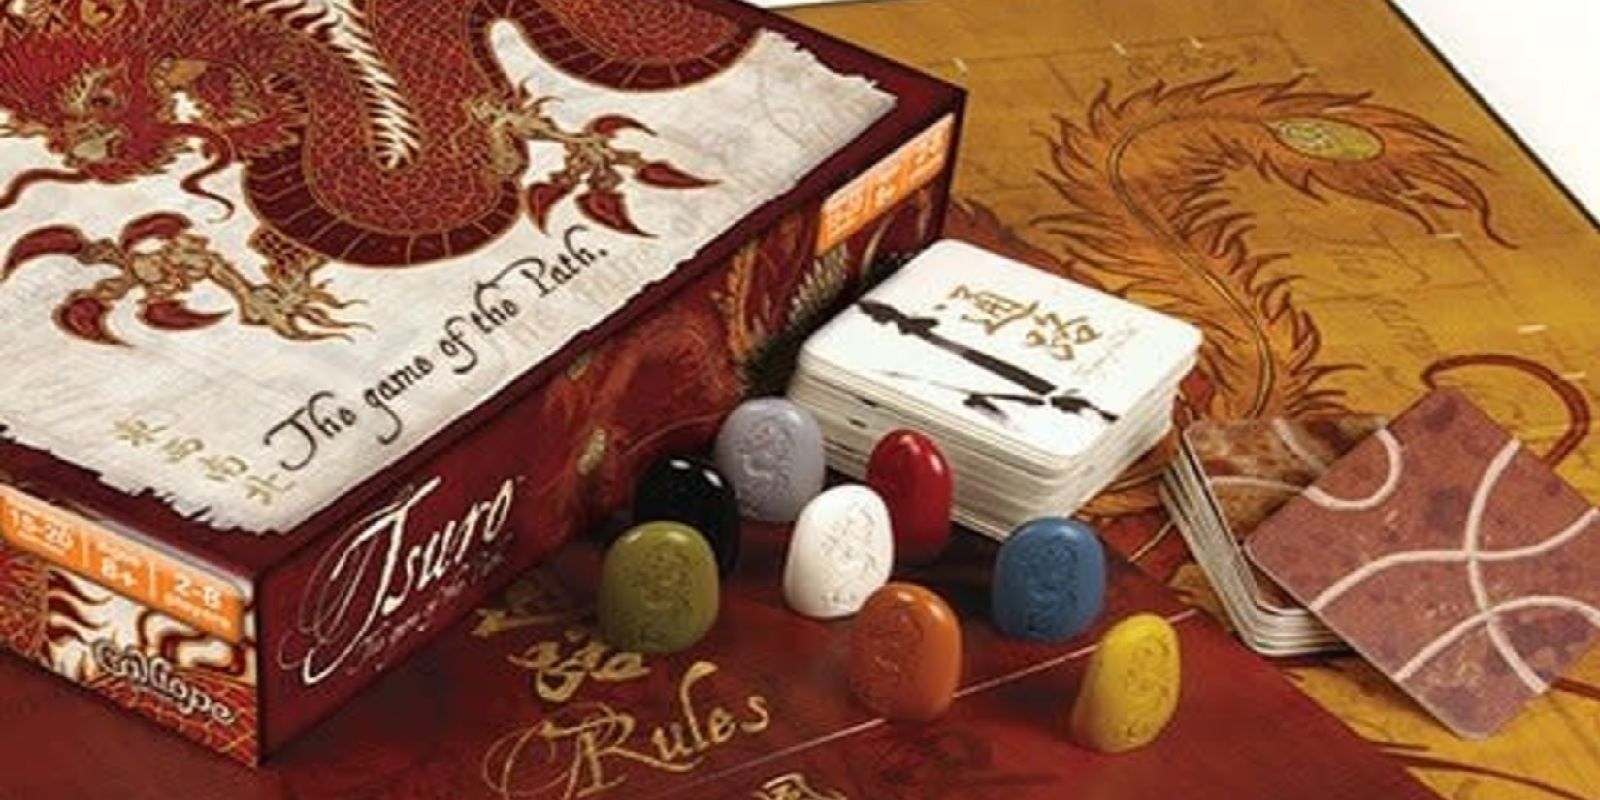 The game board, box, and components for Tsuro: The game of the Path